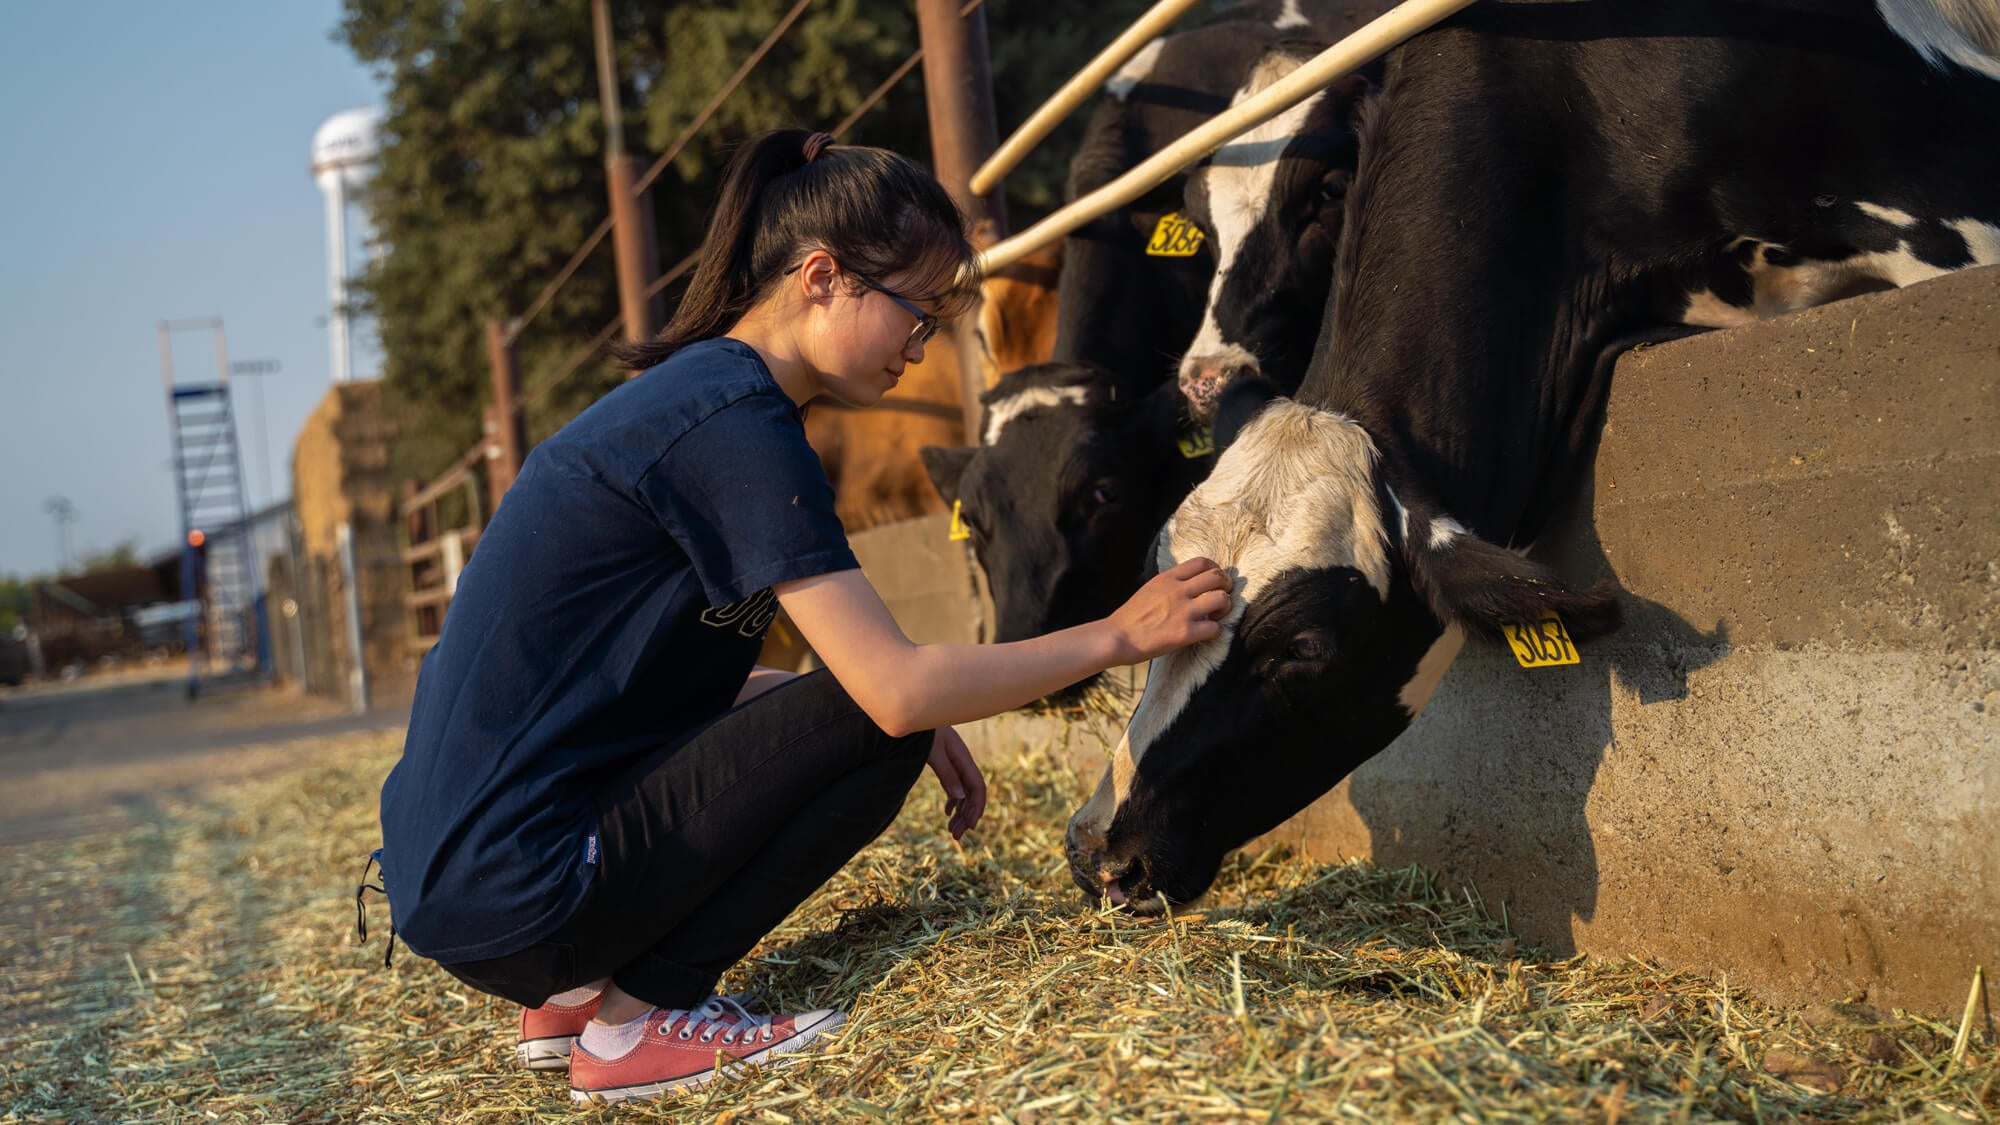 A student connects with dairy cattle at the campus farm on orientation day in 2020, exemplifying the university's commitment to agricultural education and animal care. (Student Housing Office/UC Davis)